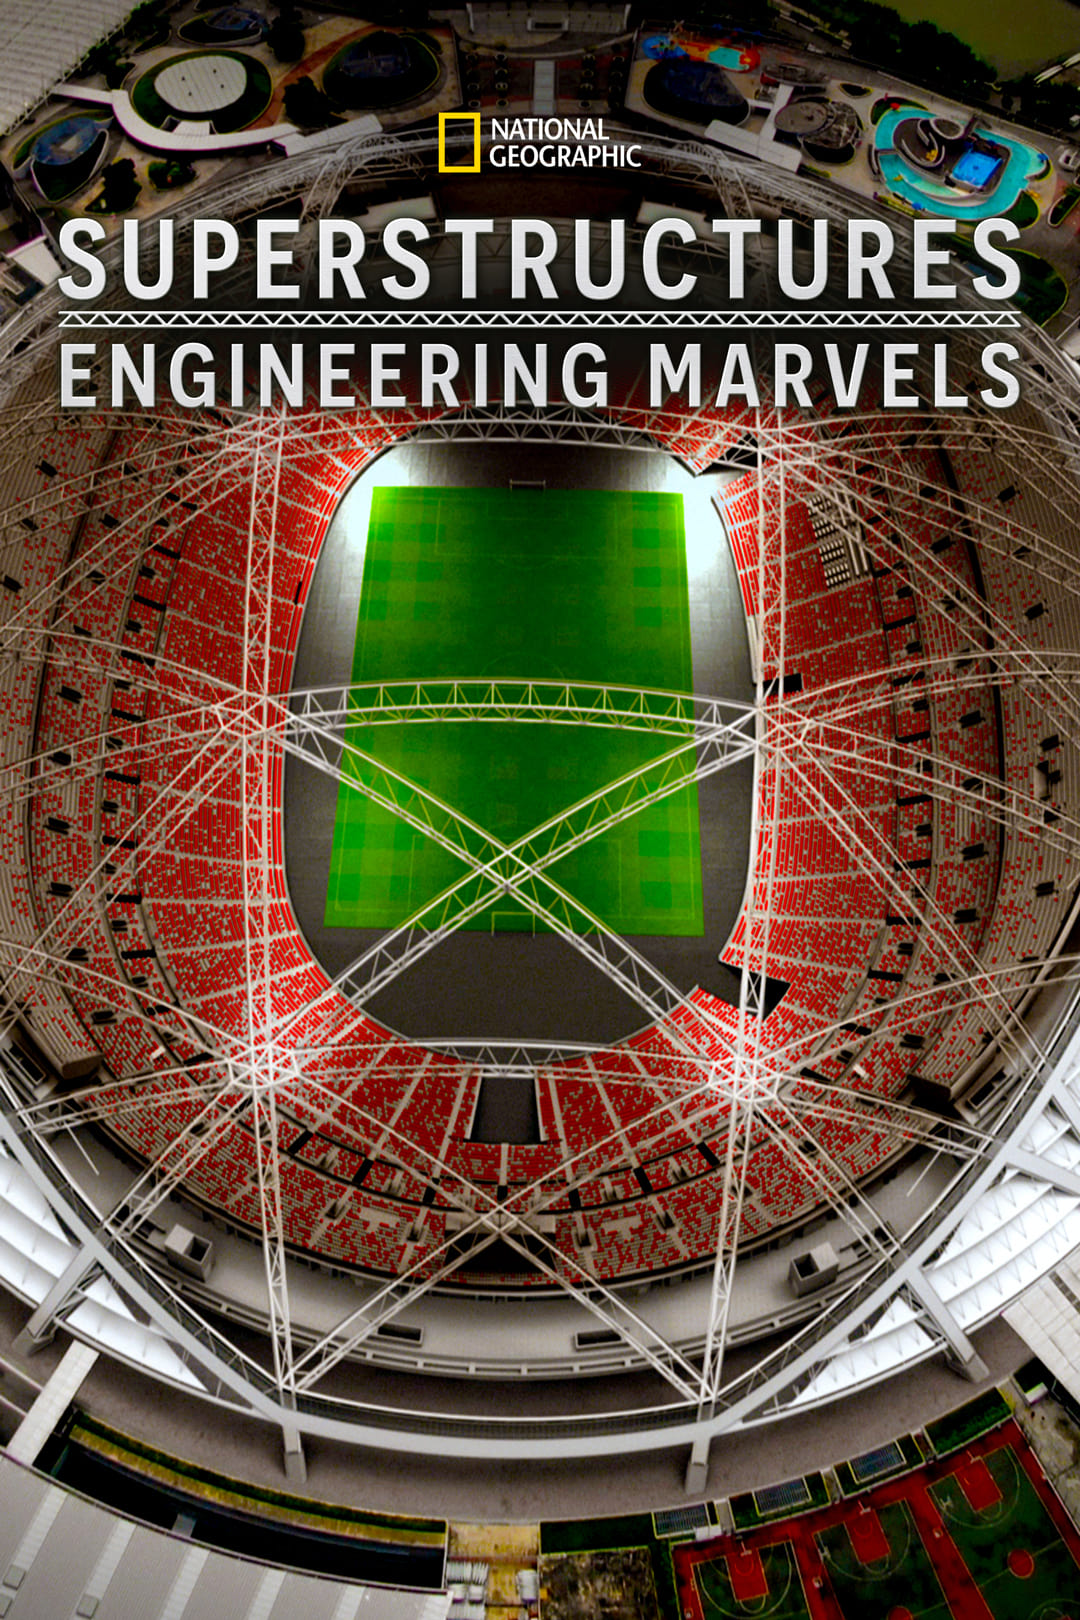 Superstructures: Engineering Marvels TV Shows About Engineering